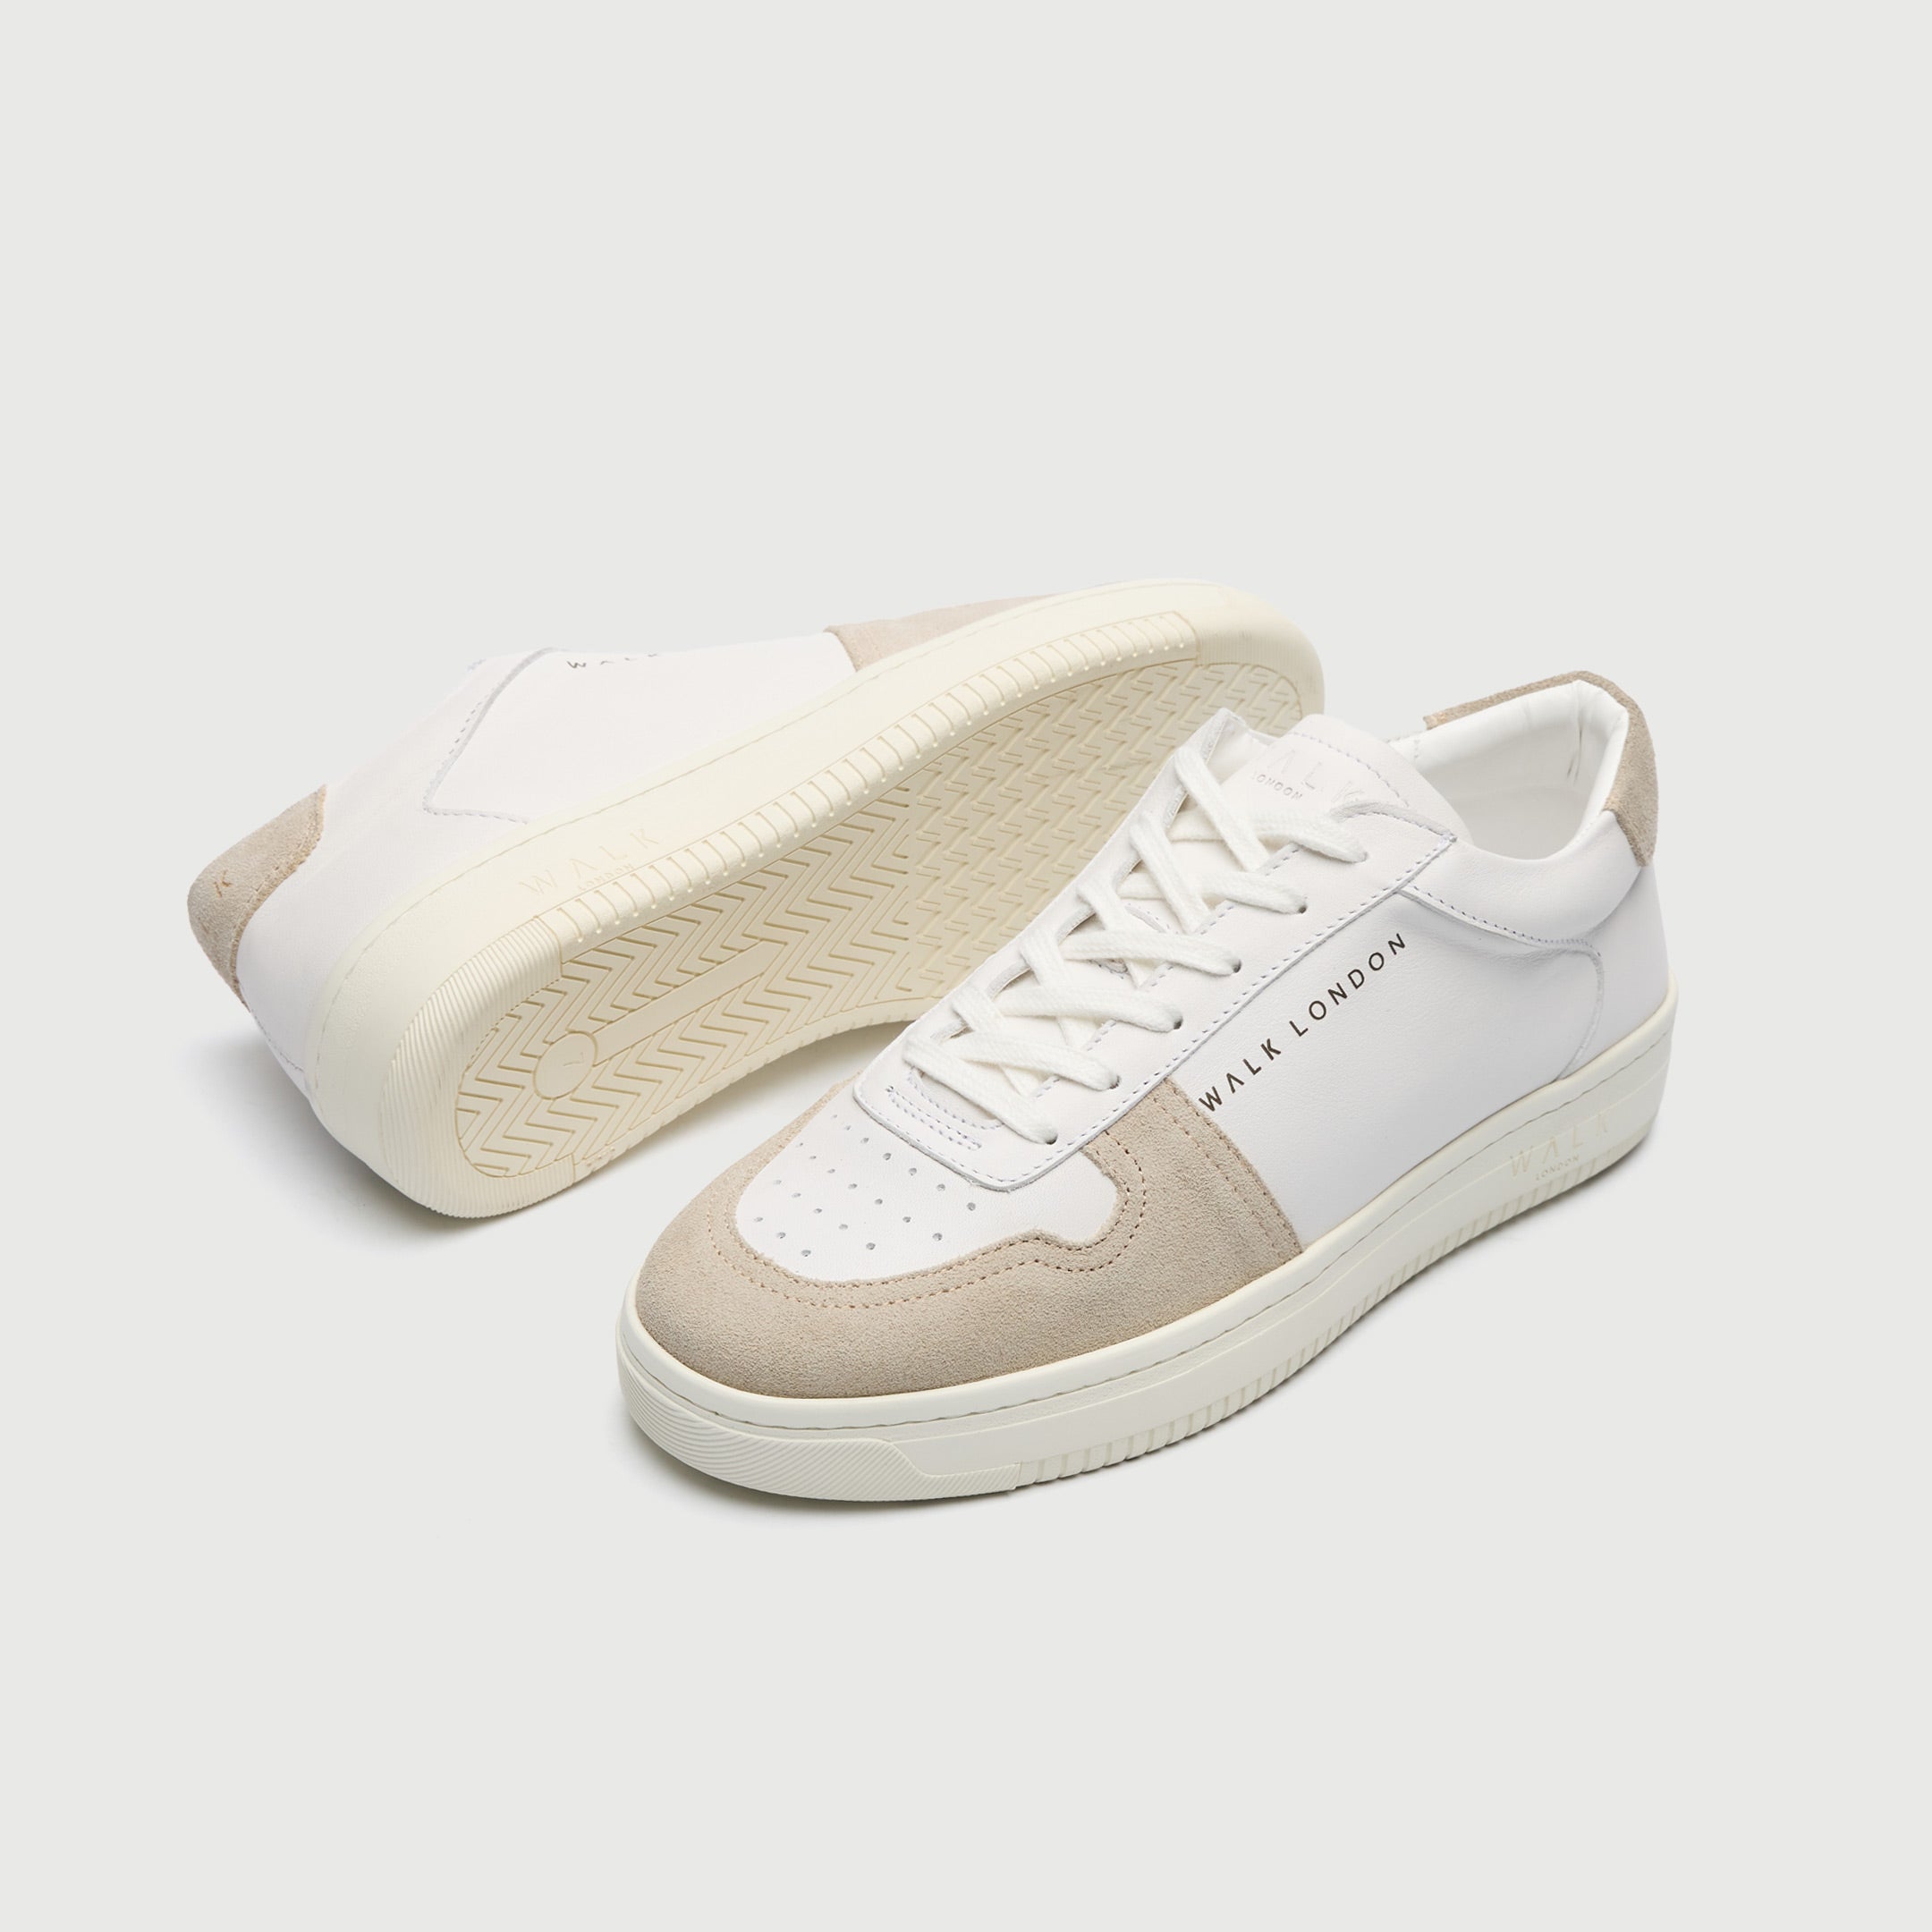 WALK London Mens Neo Sneaker in White Leather and Stone Suede